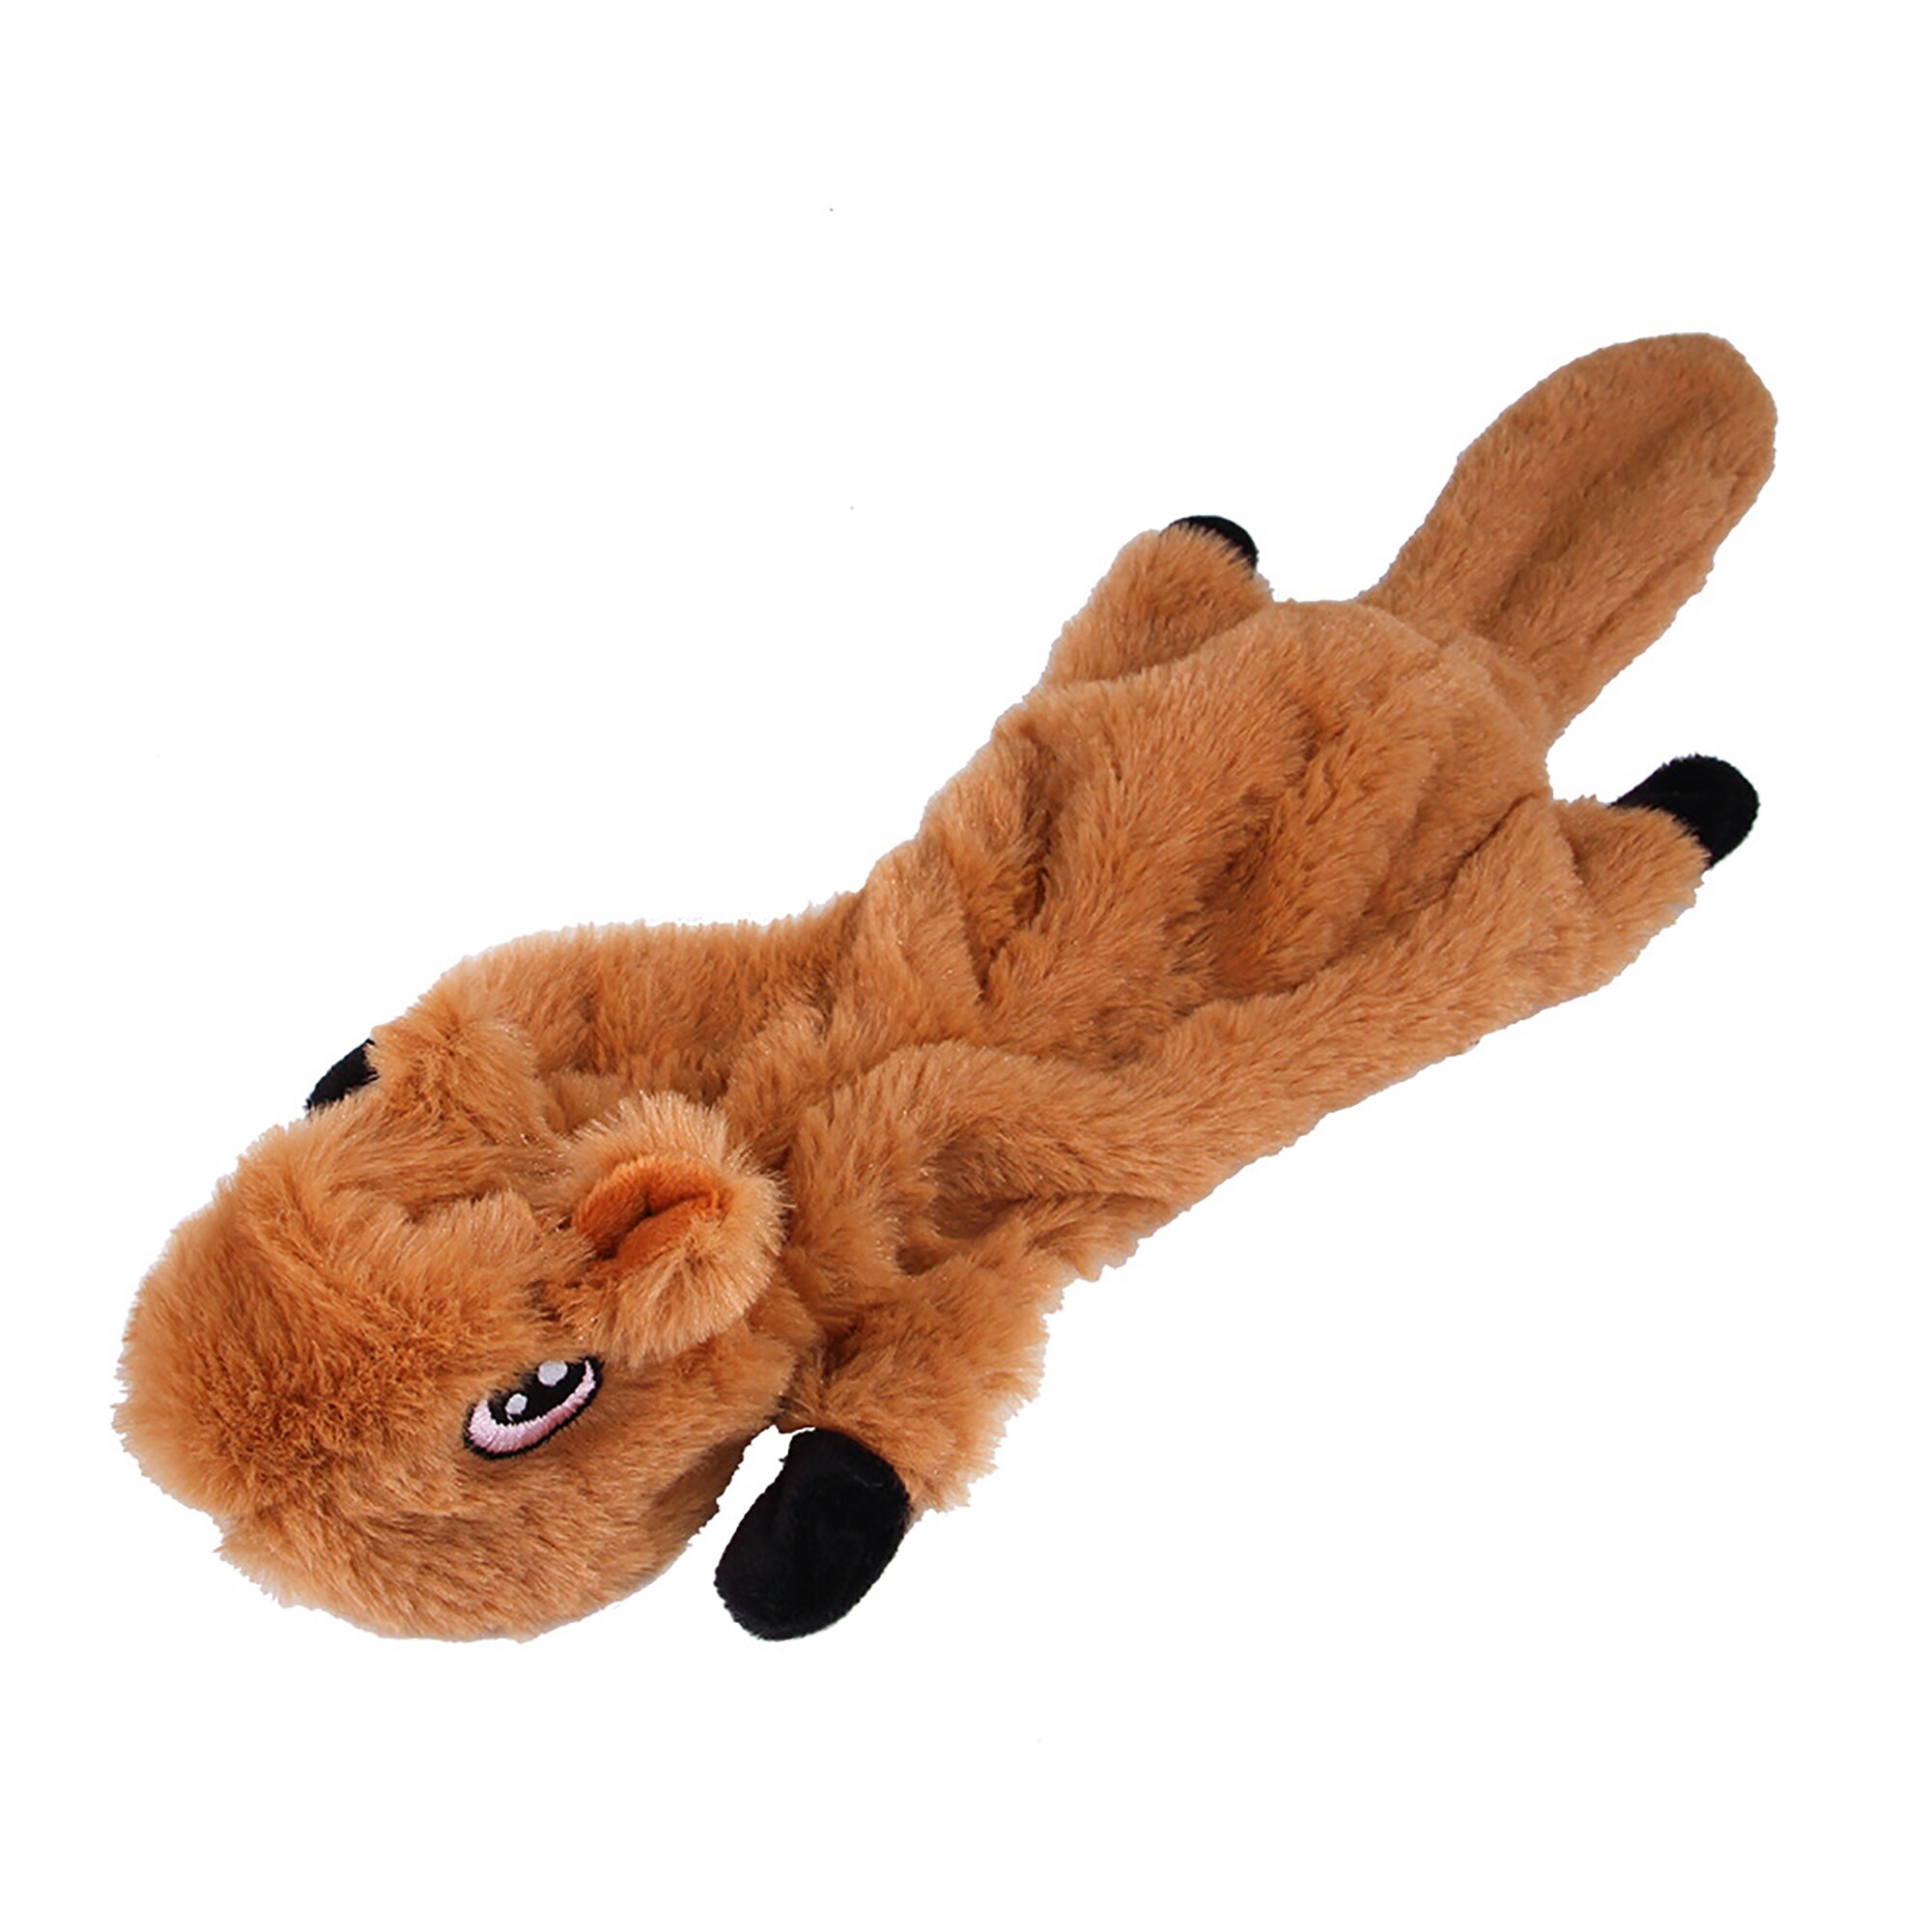 where can i buy stuffing for stuffed animal